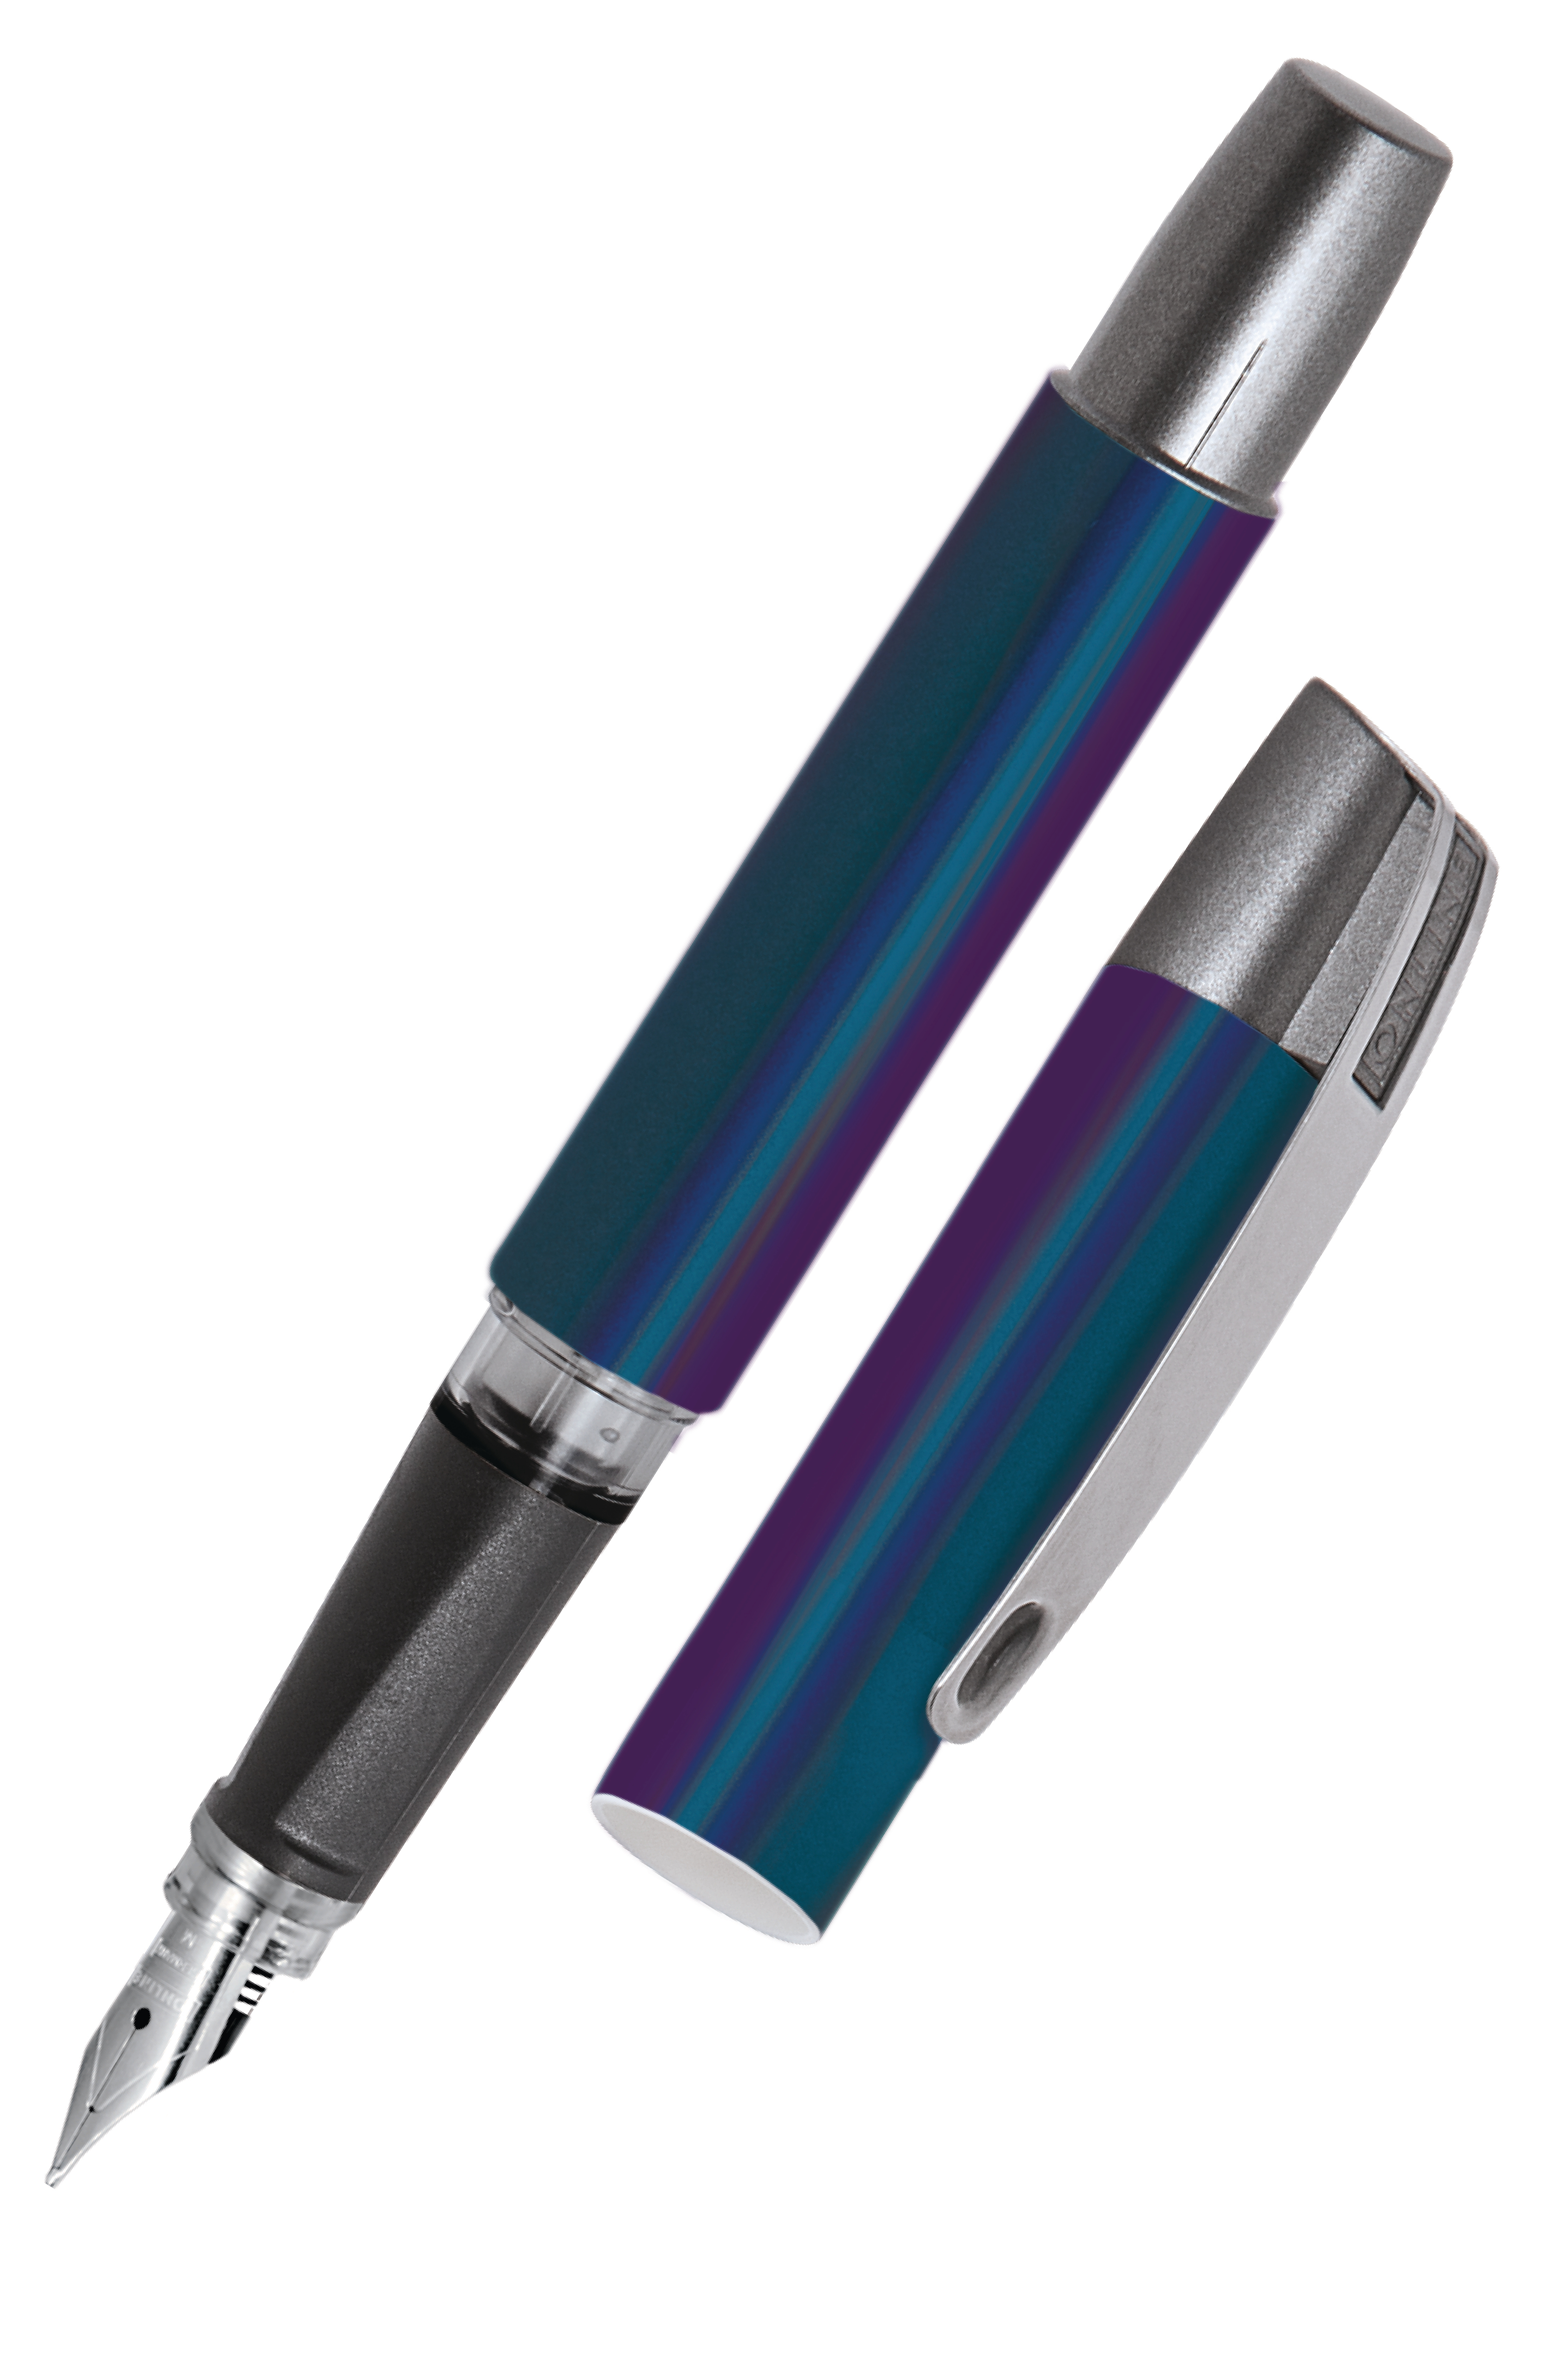 ONLINE Stylo plume Campus II M 61483/3D Miracle